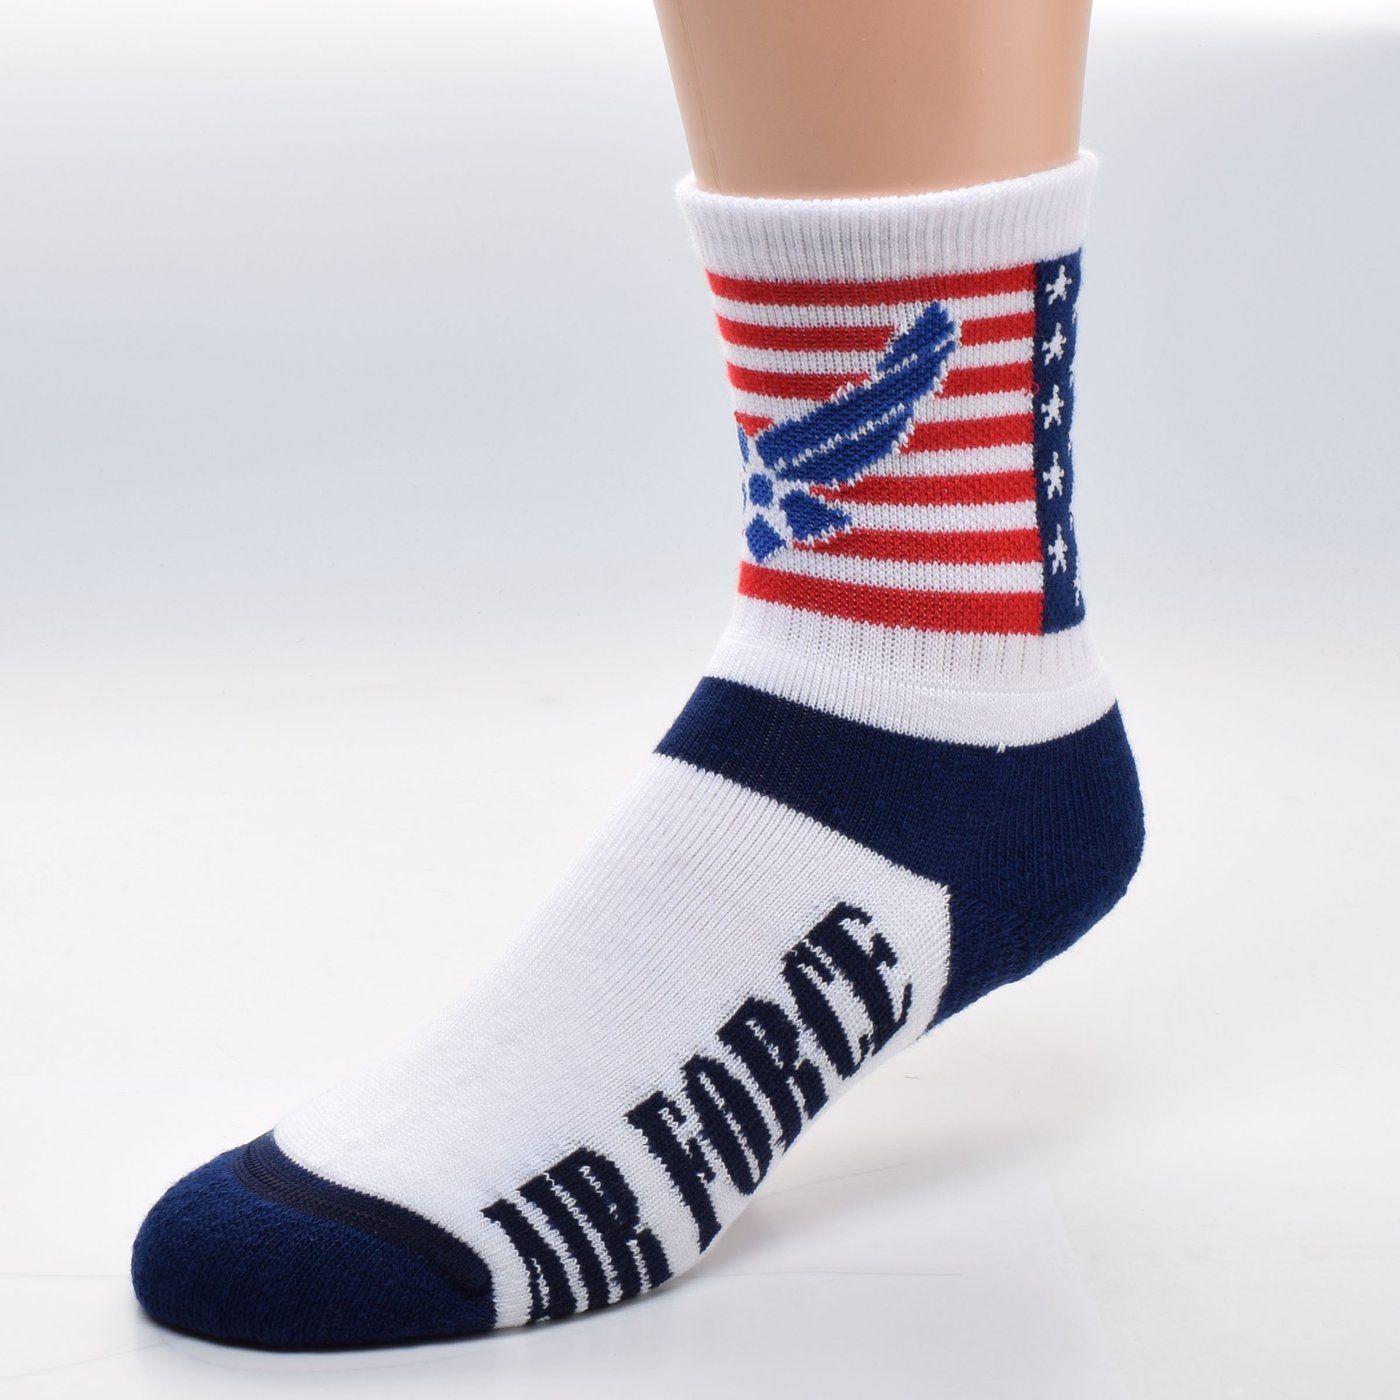 Red Foot White Wing Logo - FBF US Air Force Cuff Sock